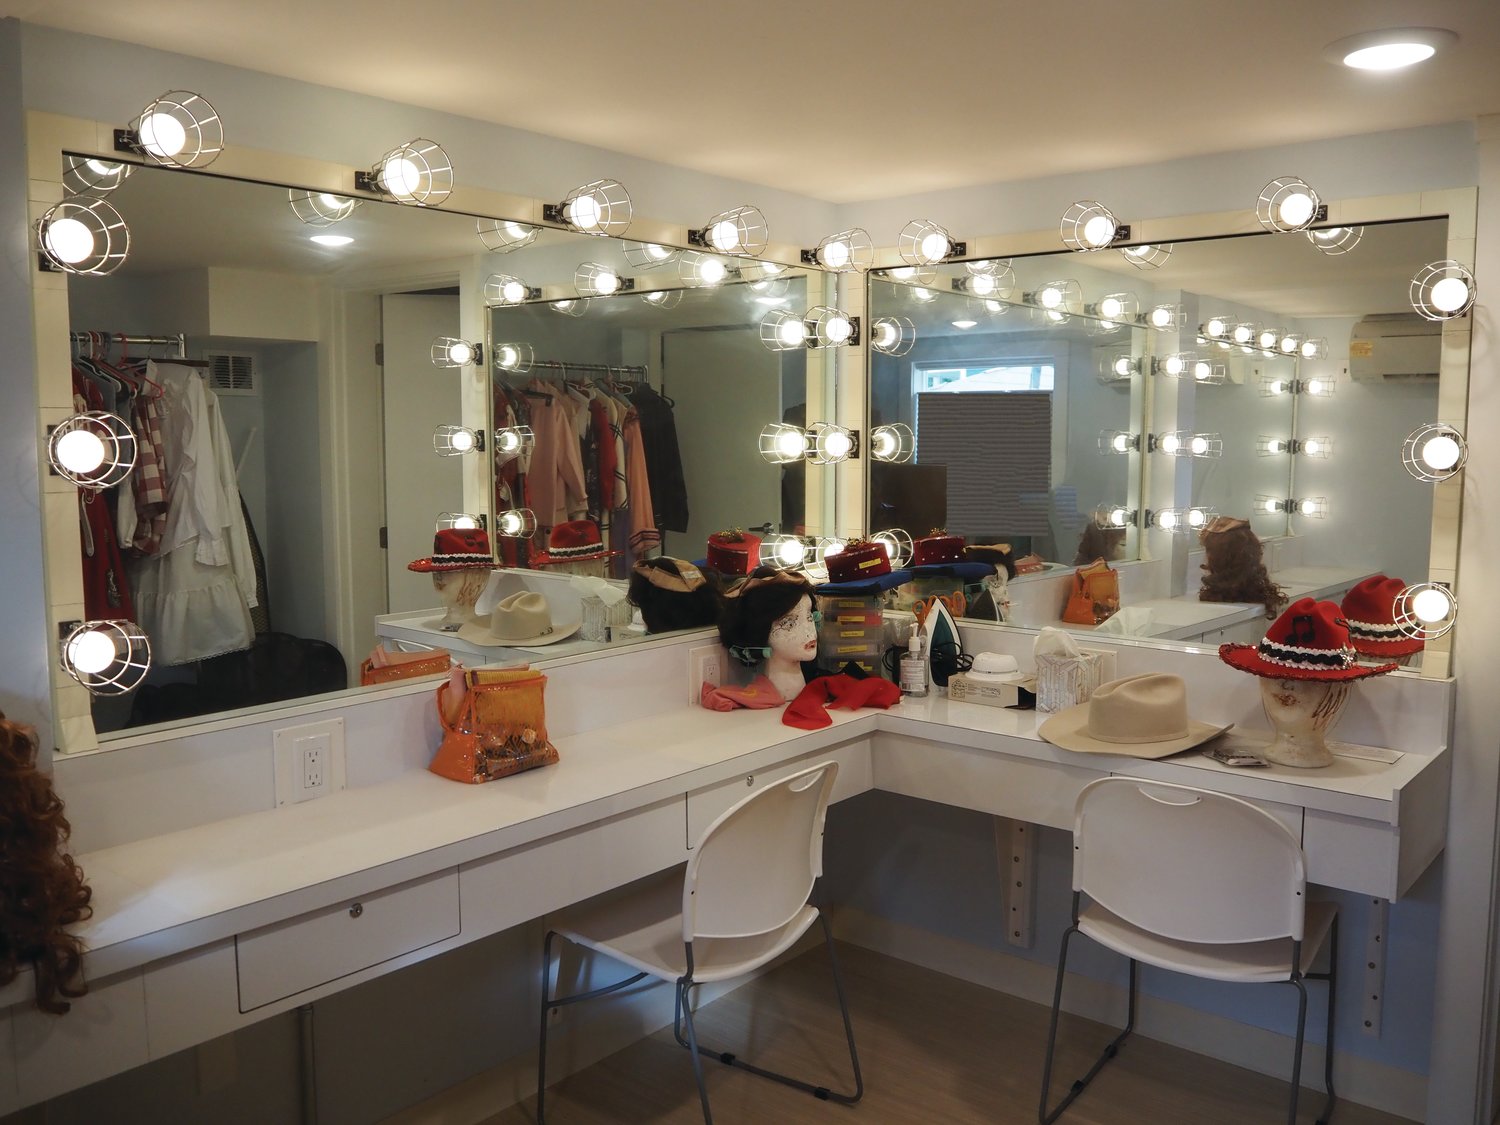 Back stage got a face lift all its own with new light fixtures for actors to get their faces on as well as individually locking drawers to keep their make-up secrets safe.